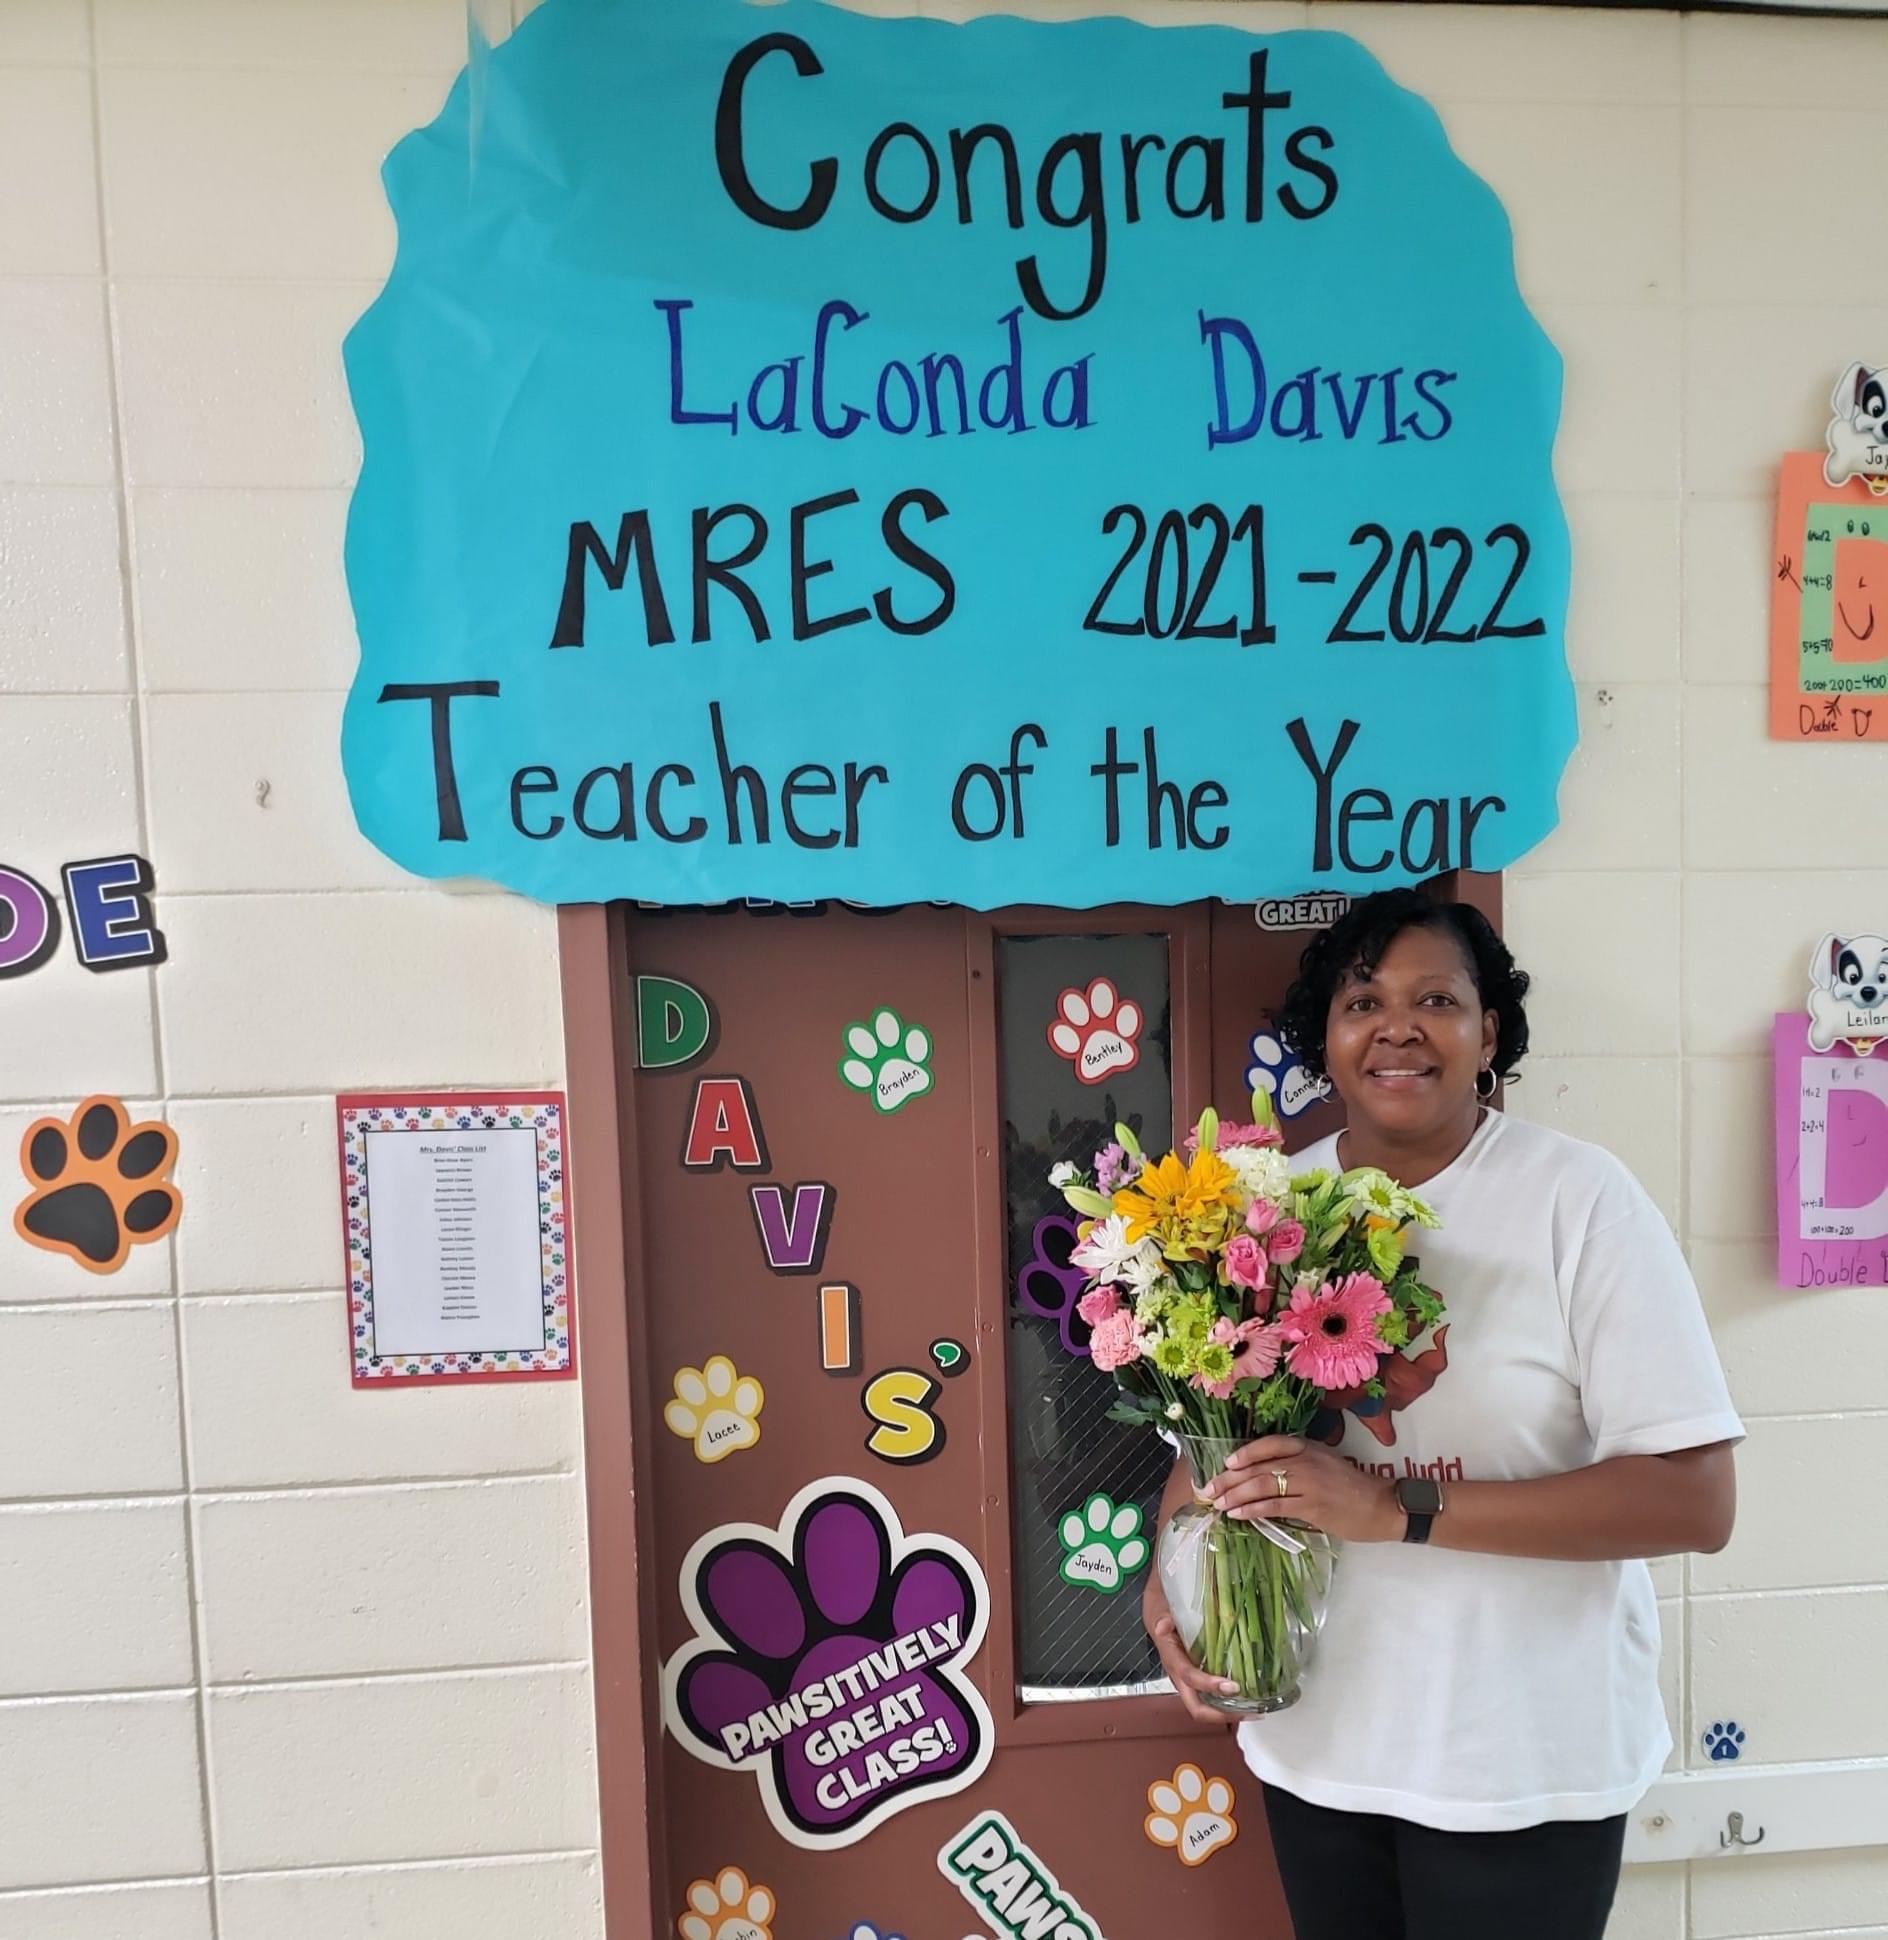 Mrs. Davis is our Teacher of the Year.